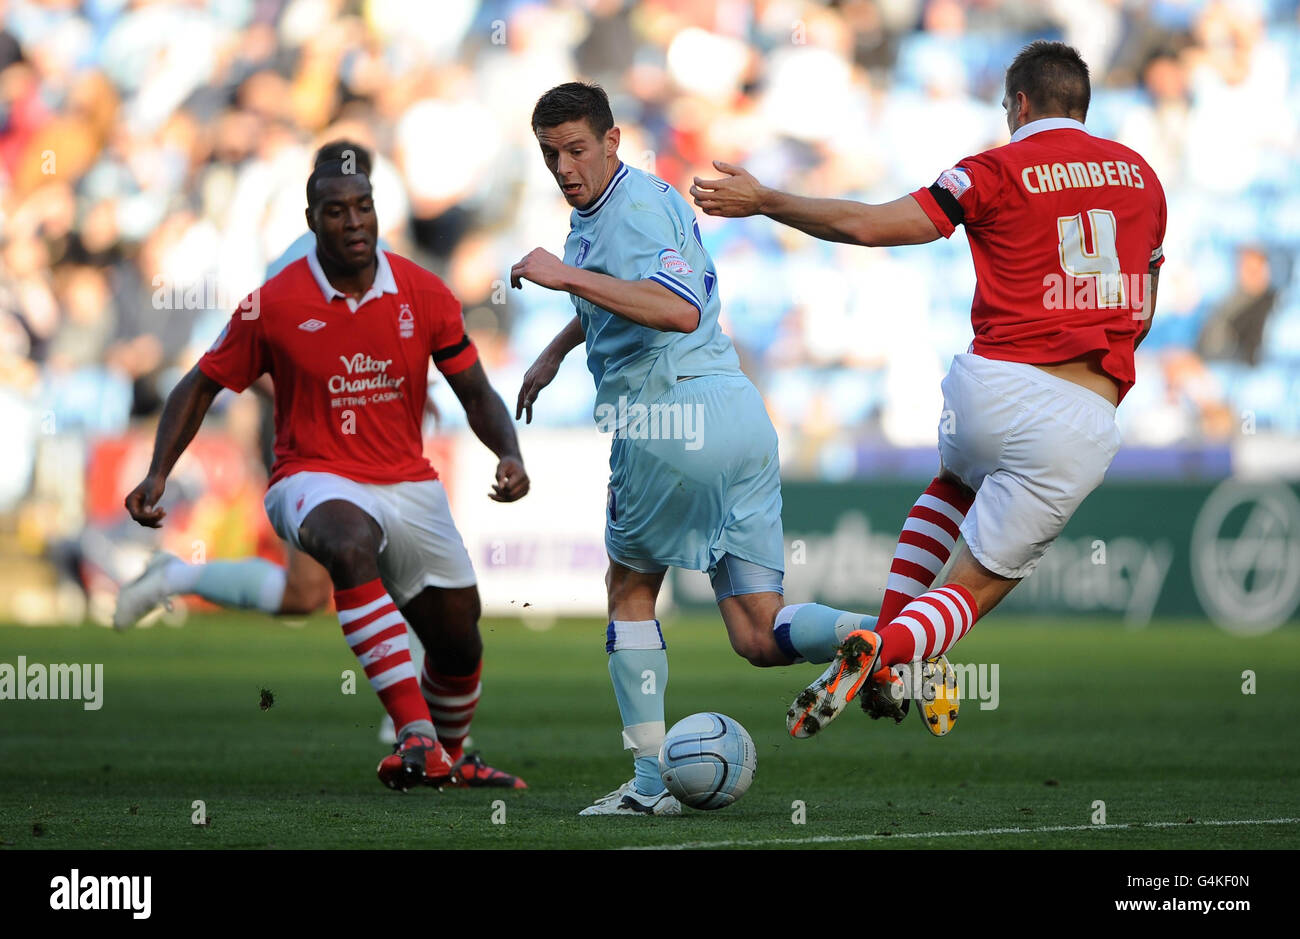 Coventry City's Lukas Jutkiewicz and Nottingham Forest's Luke Chambers (right) during the npower Football League Championship match at the Ricoh Arena, Coventry. Stock Photo